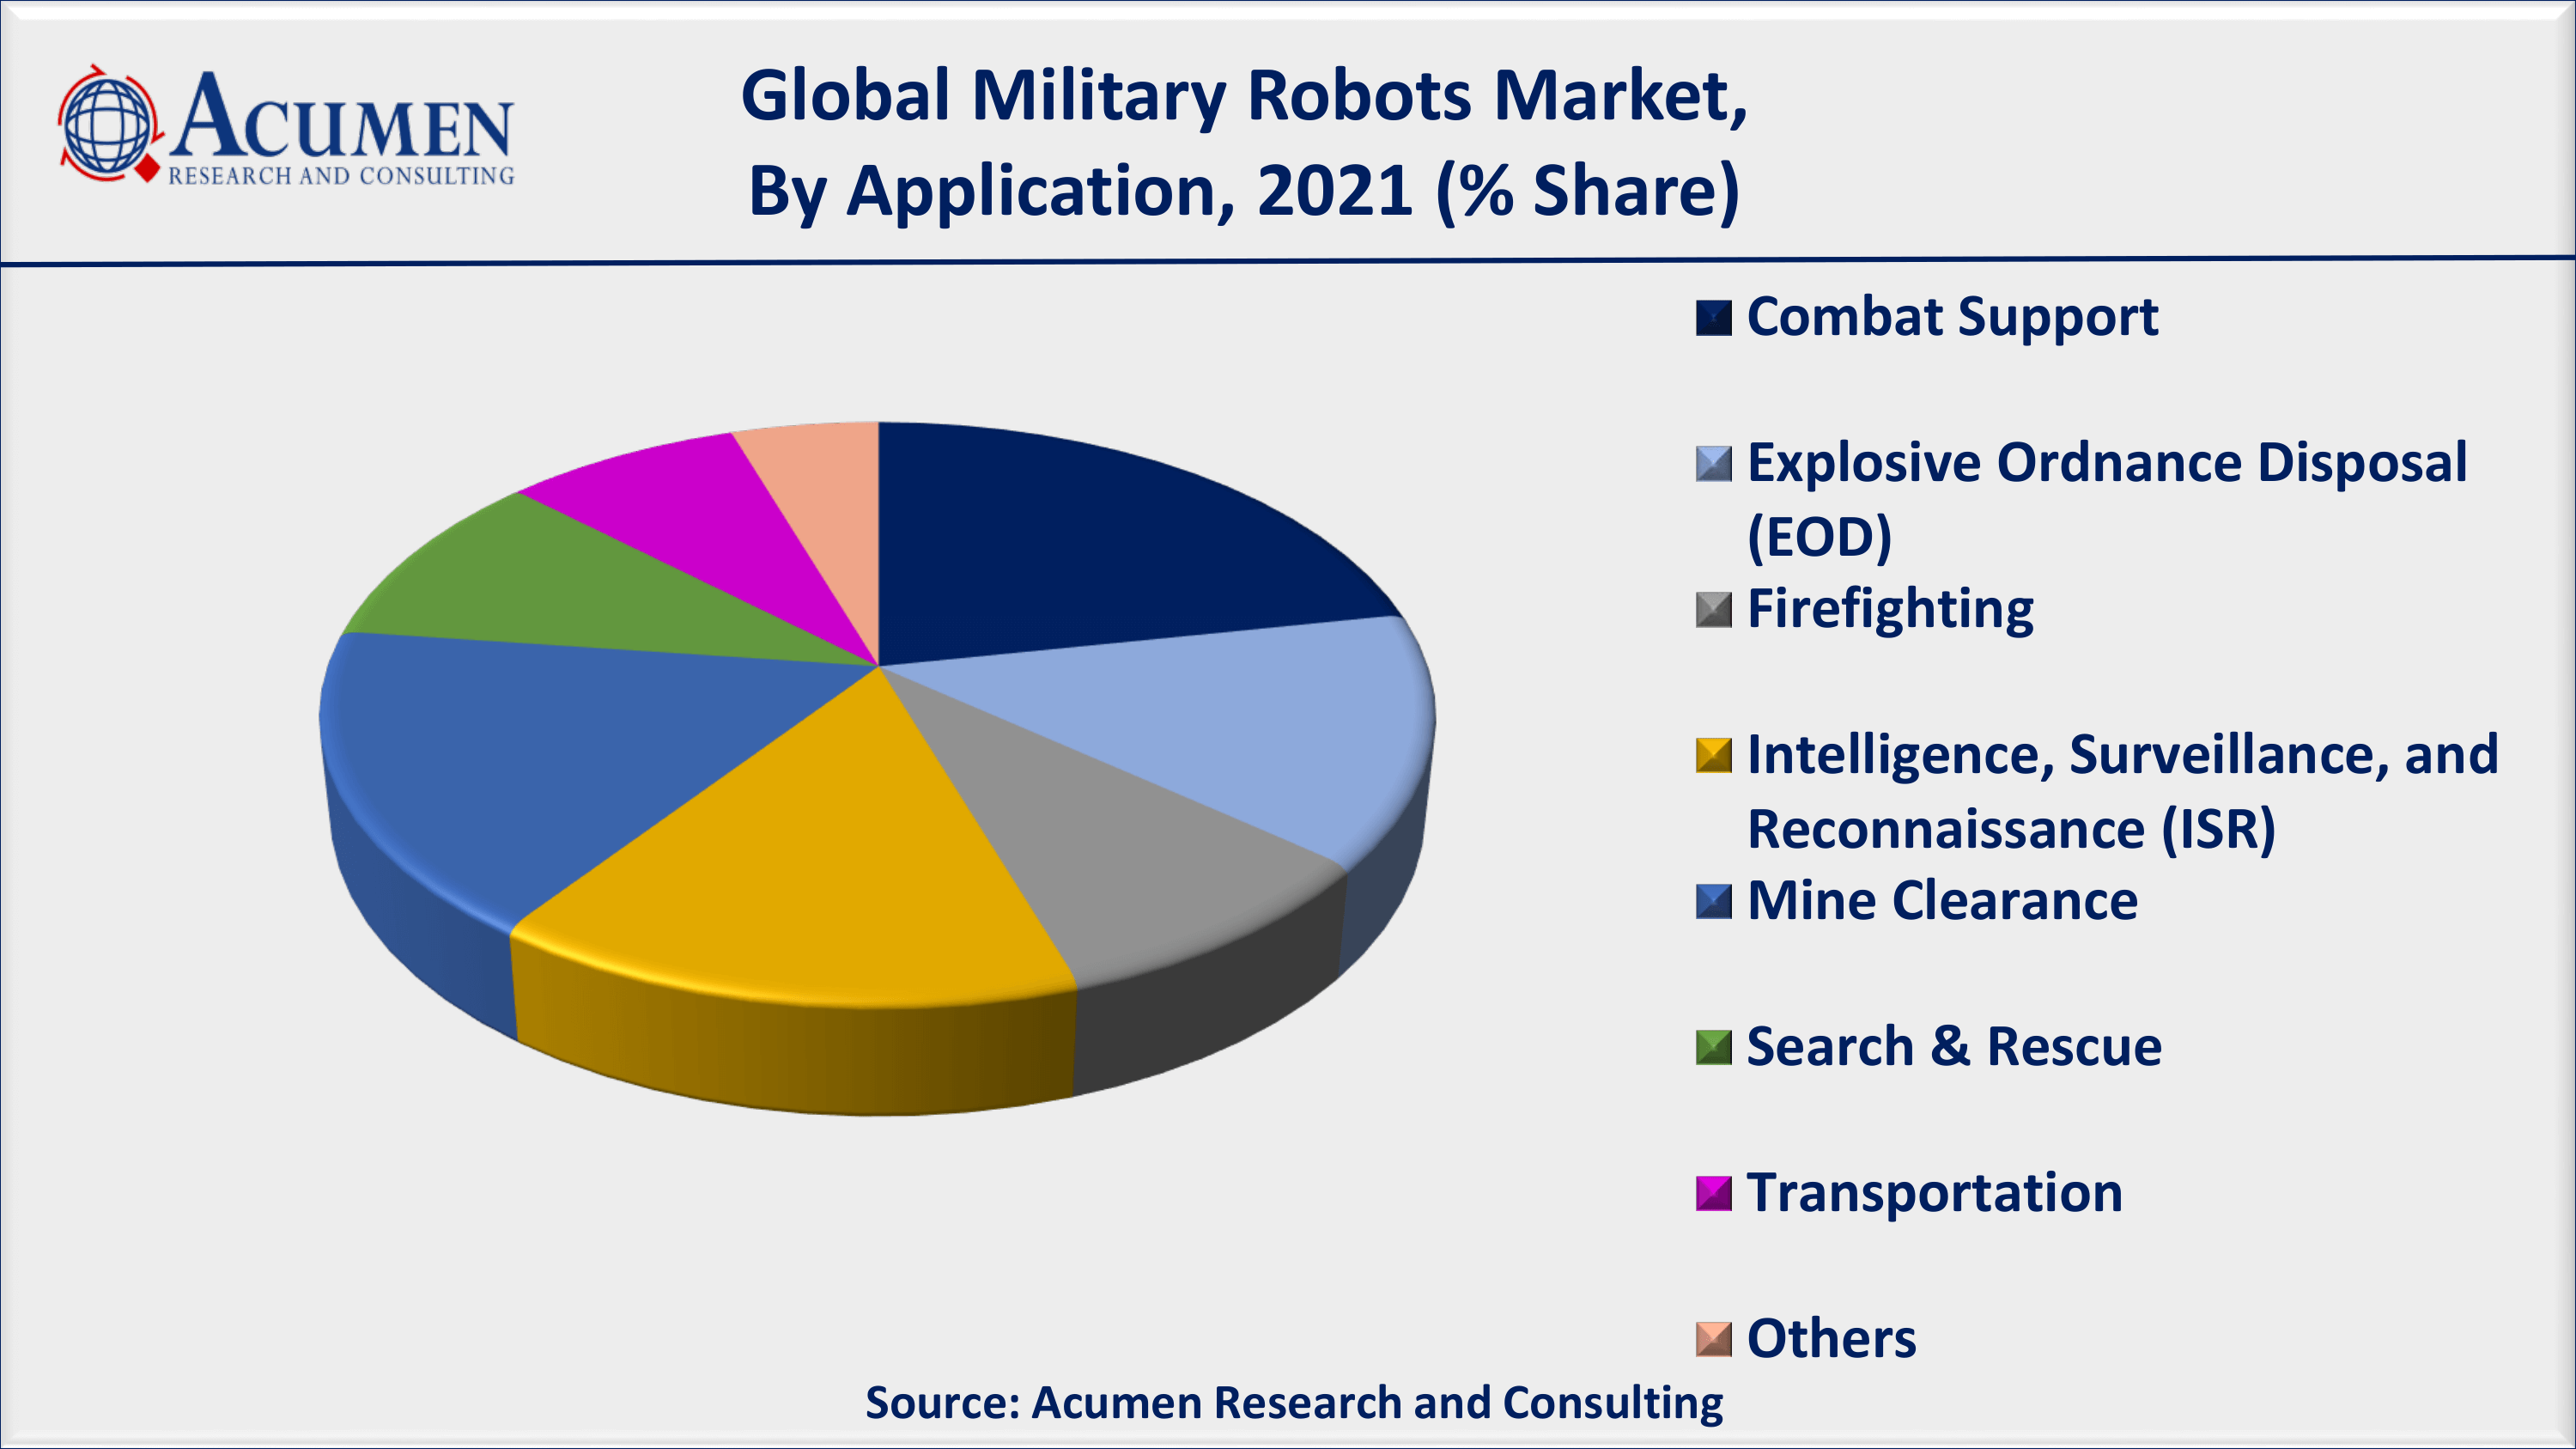 According to the recent statistics, the number of robotic units sold in 2021 was 435,000